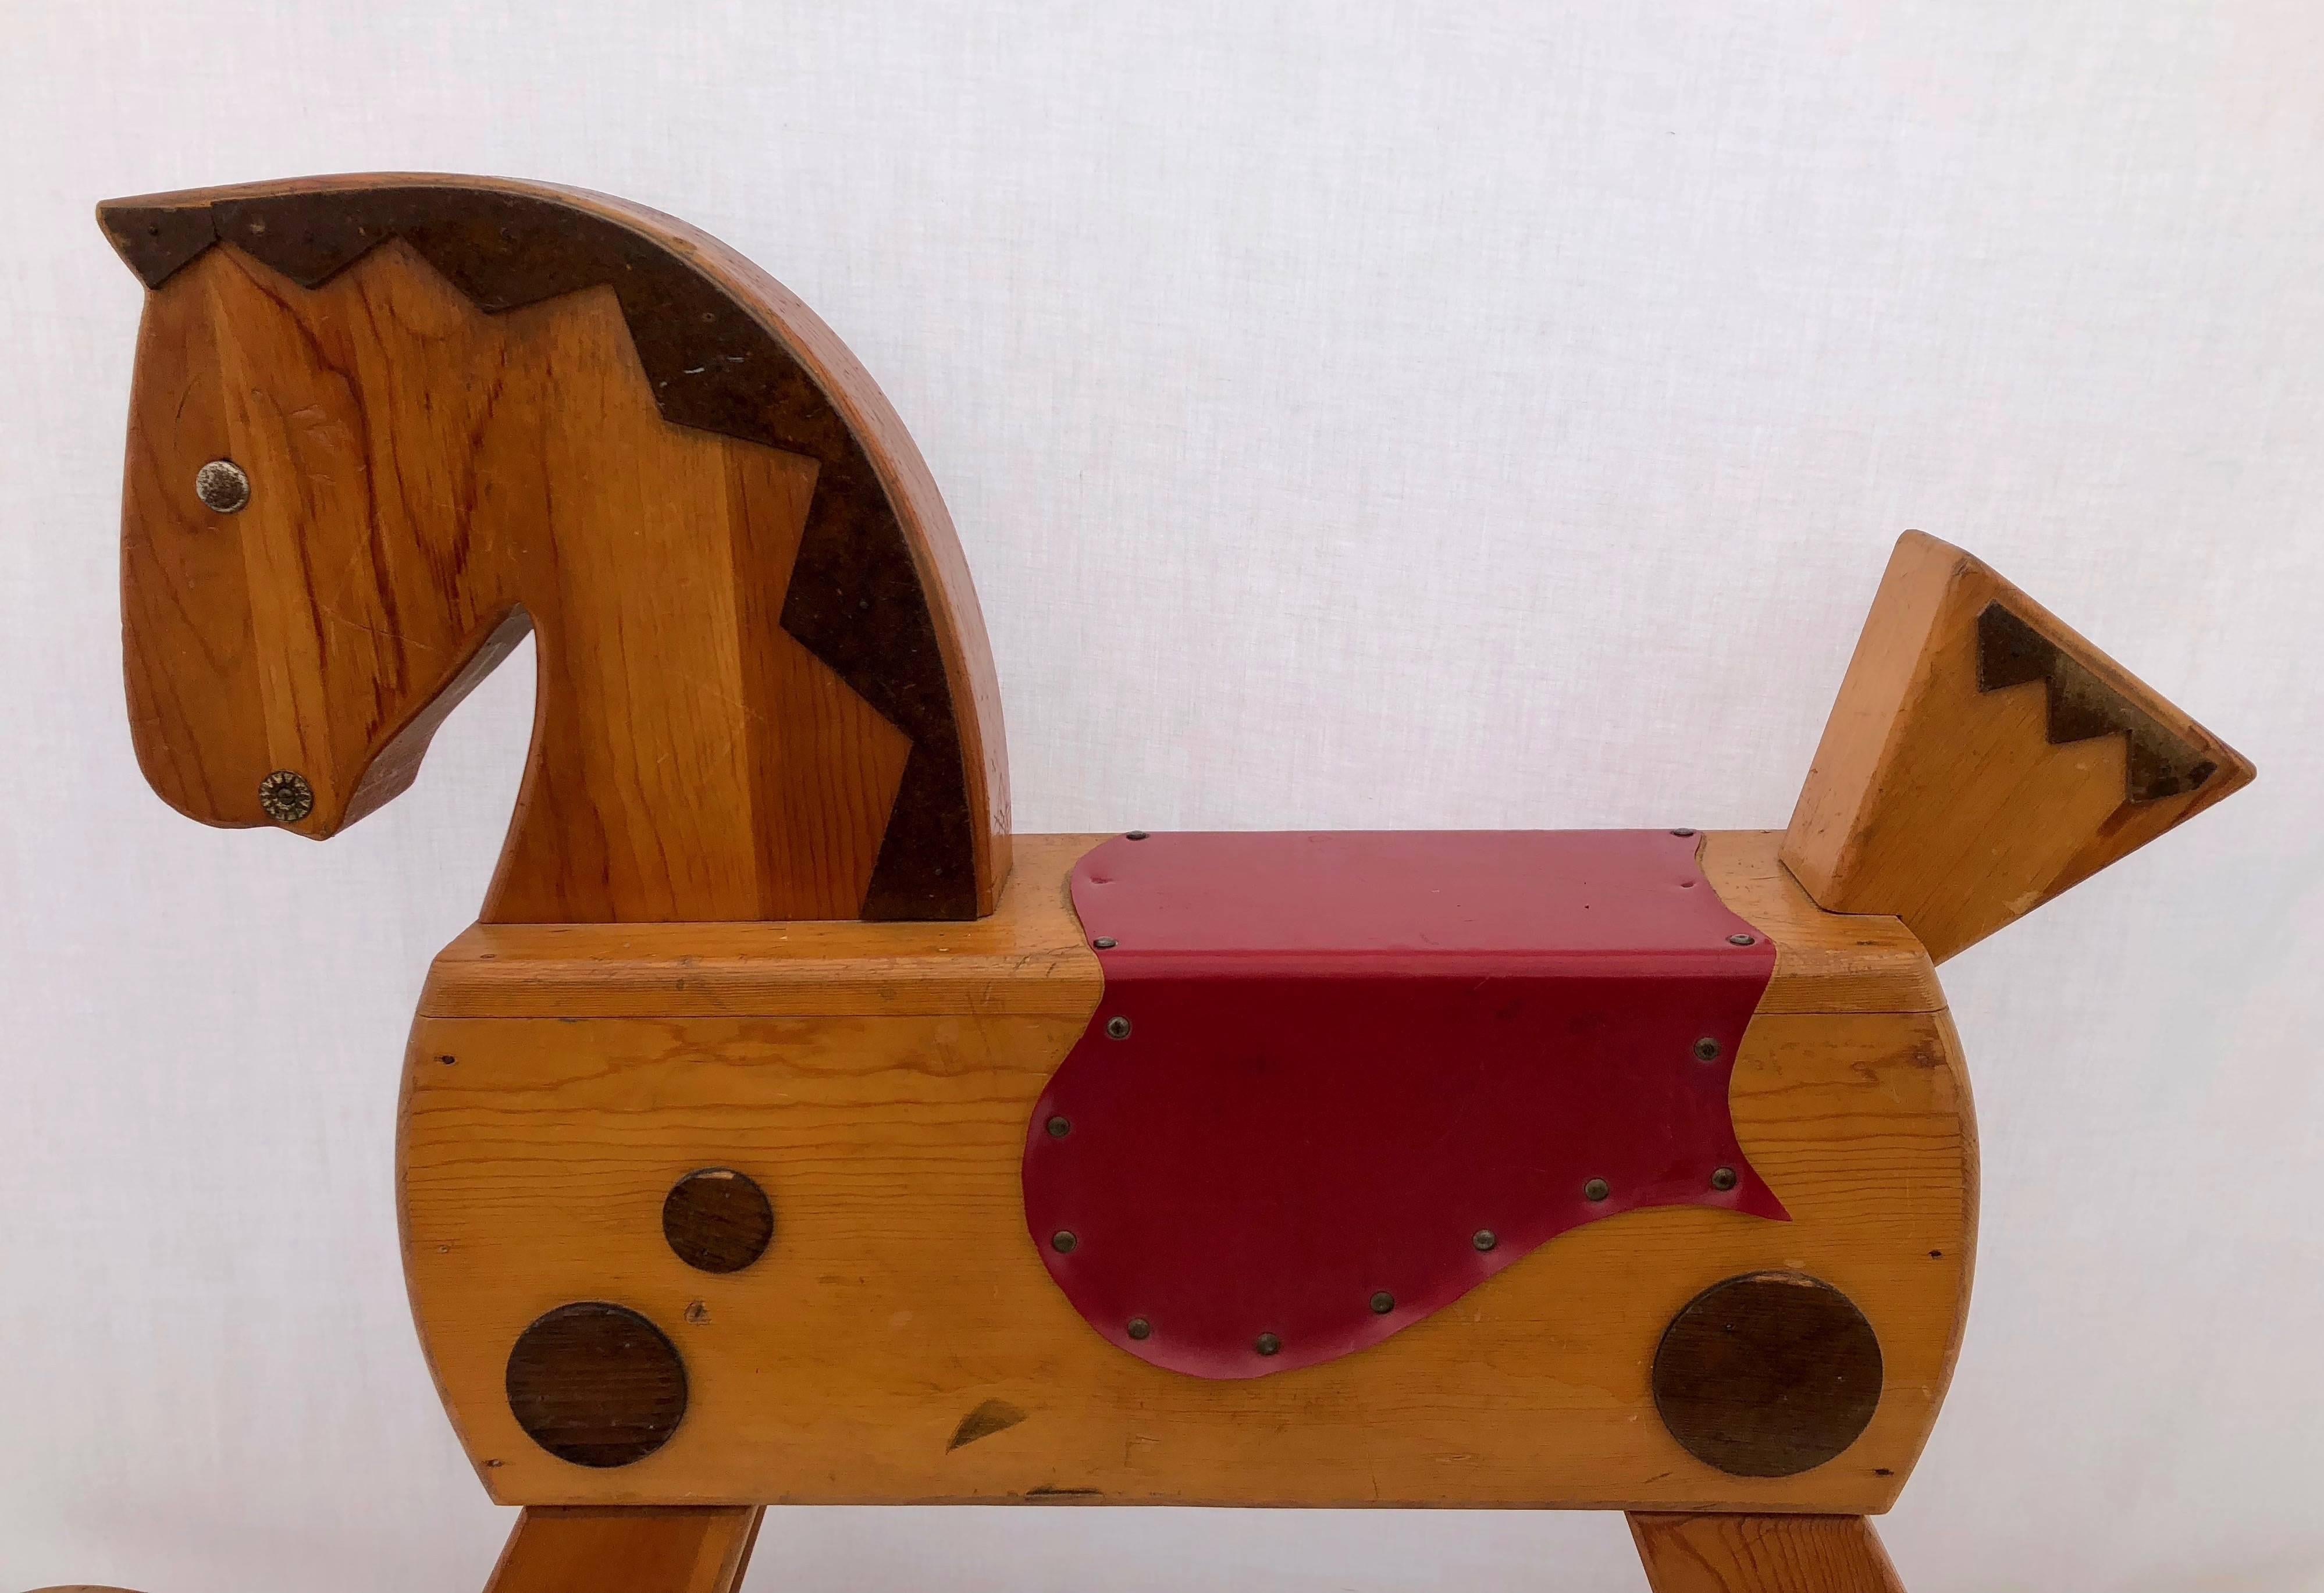 This is an absolutely charming child's wooden rocking horse with a great patina, pull-out foot rests, a mane in carved wood and saddle in red material with eyes and wood accents. Any child would love to ride such a pony.